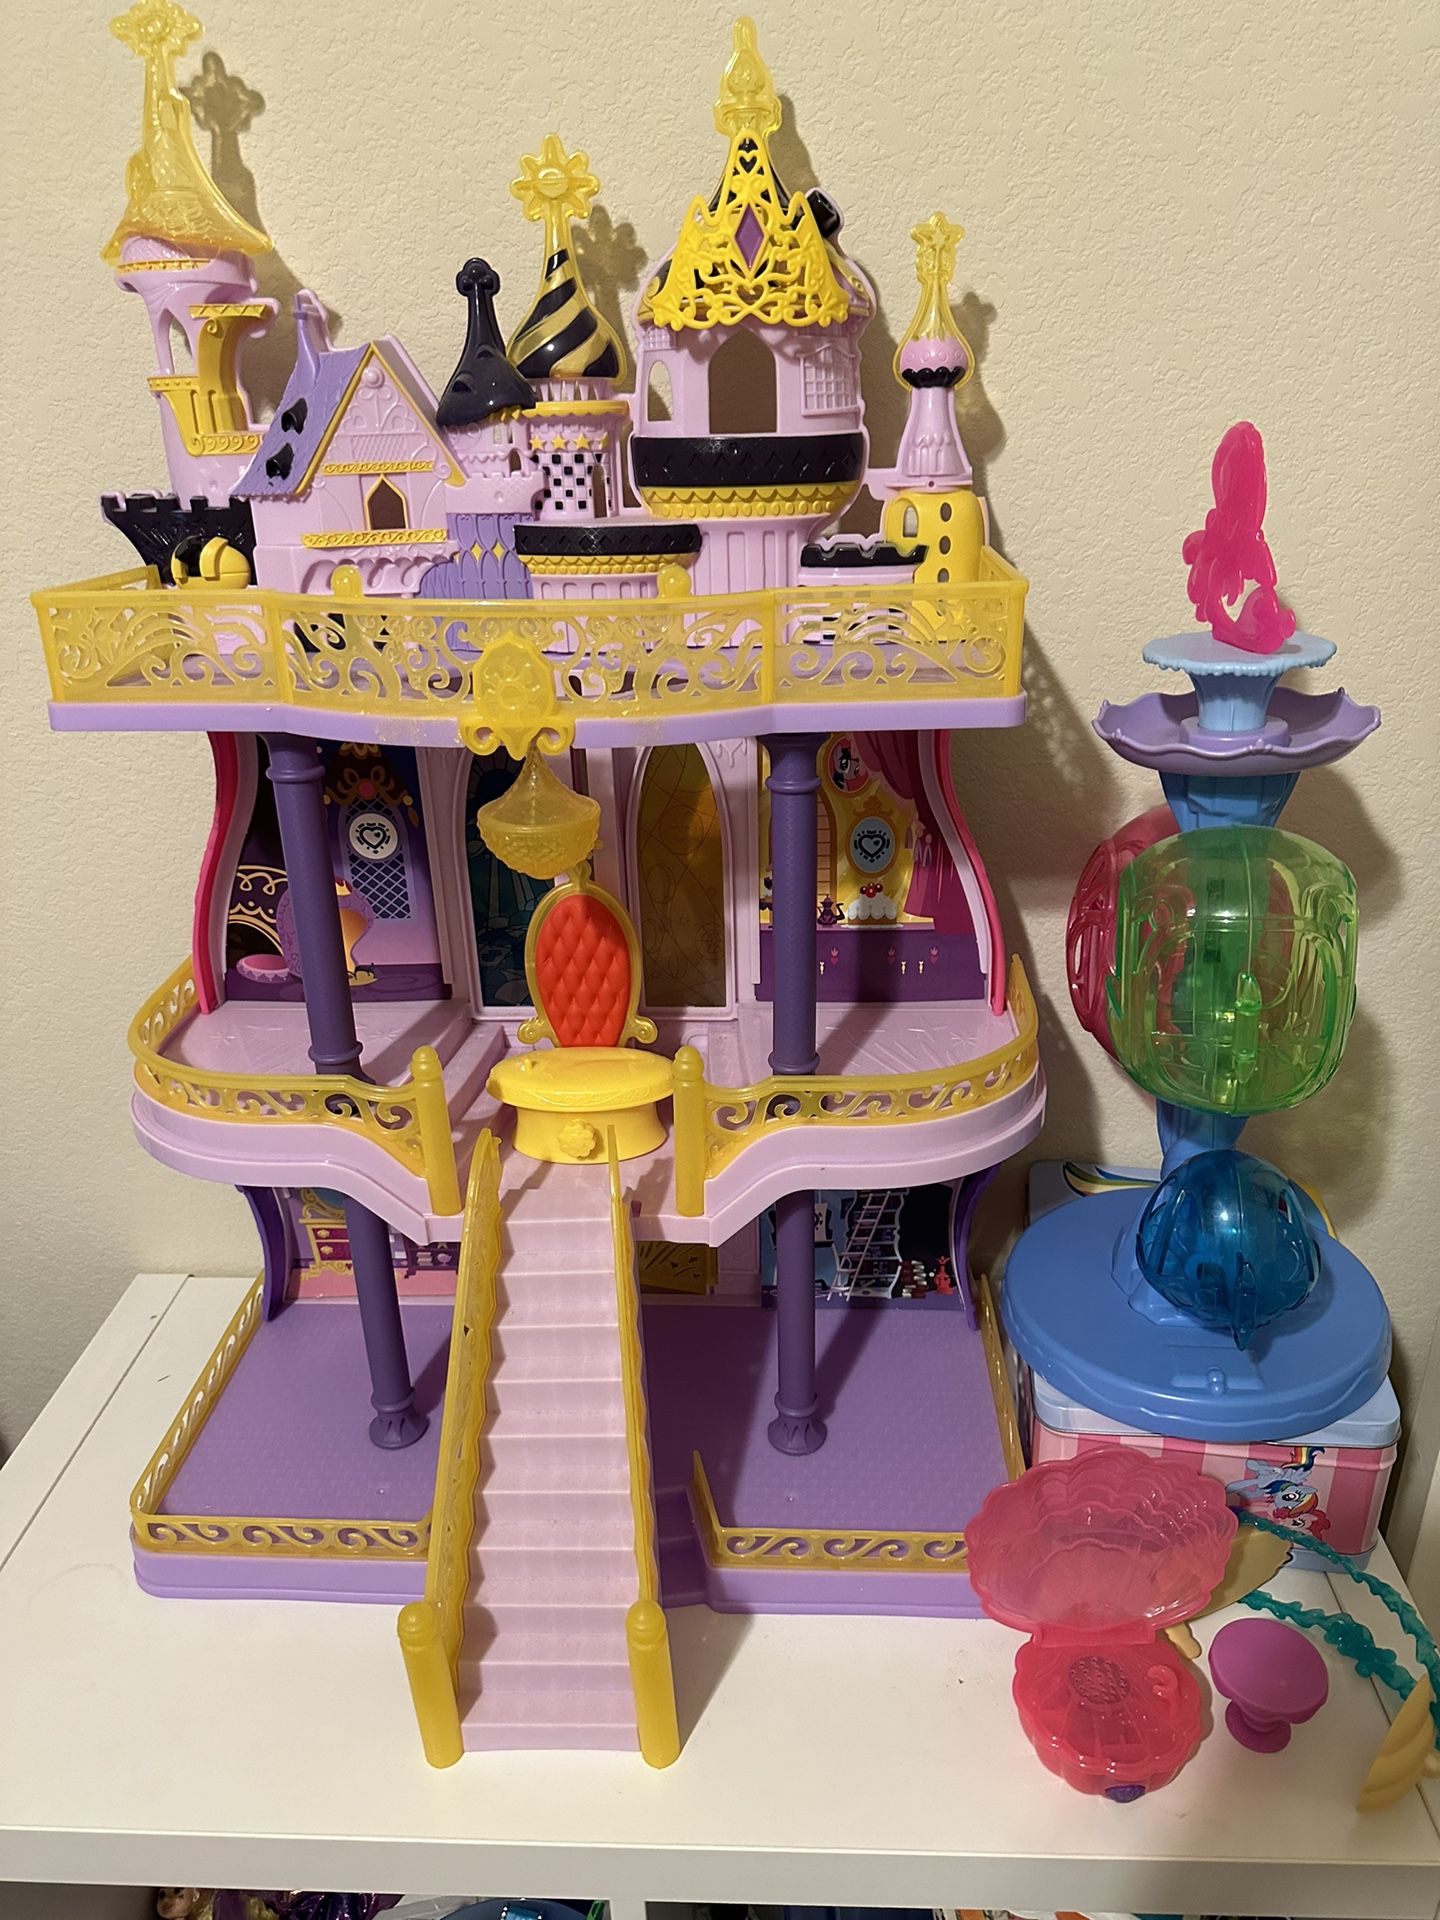 My little pony Castle Sets, Ponies And Accessories 